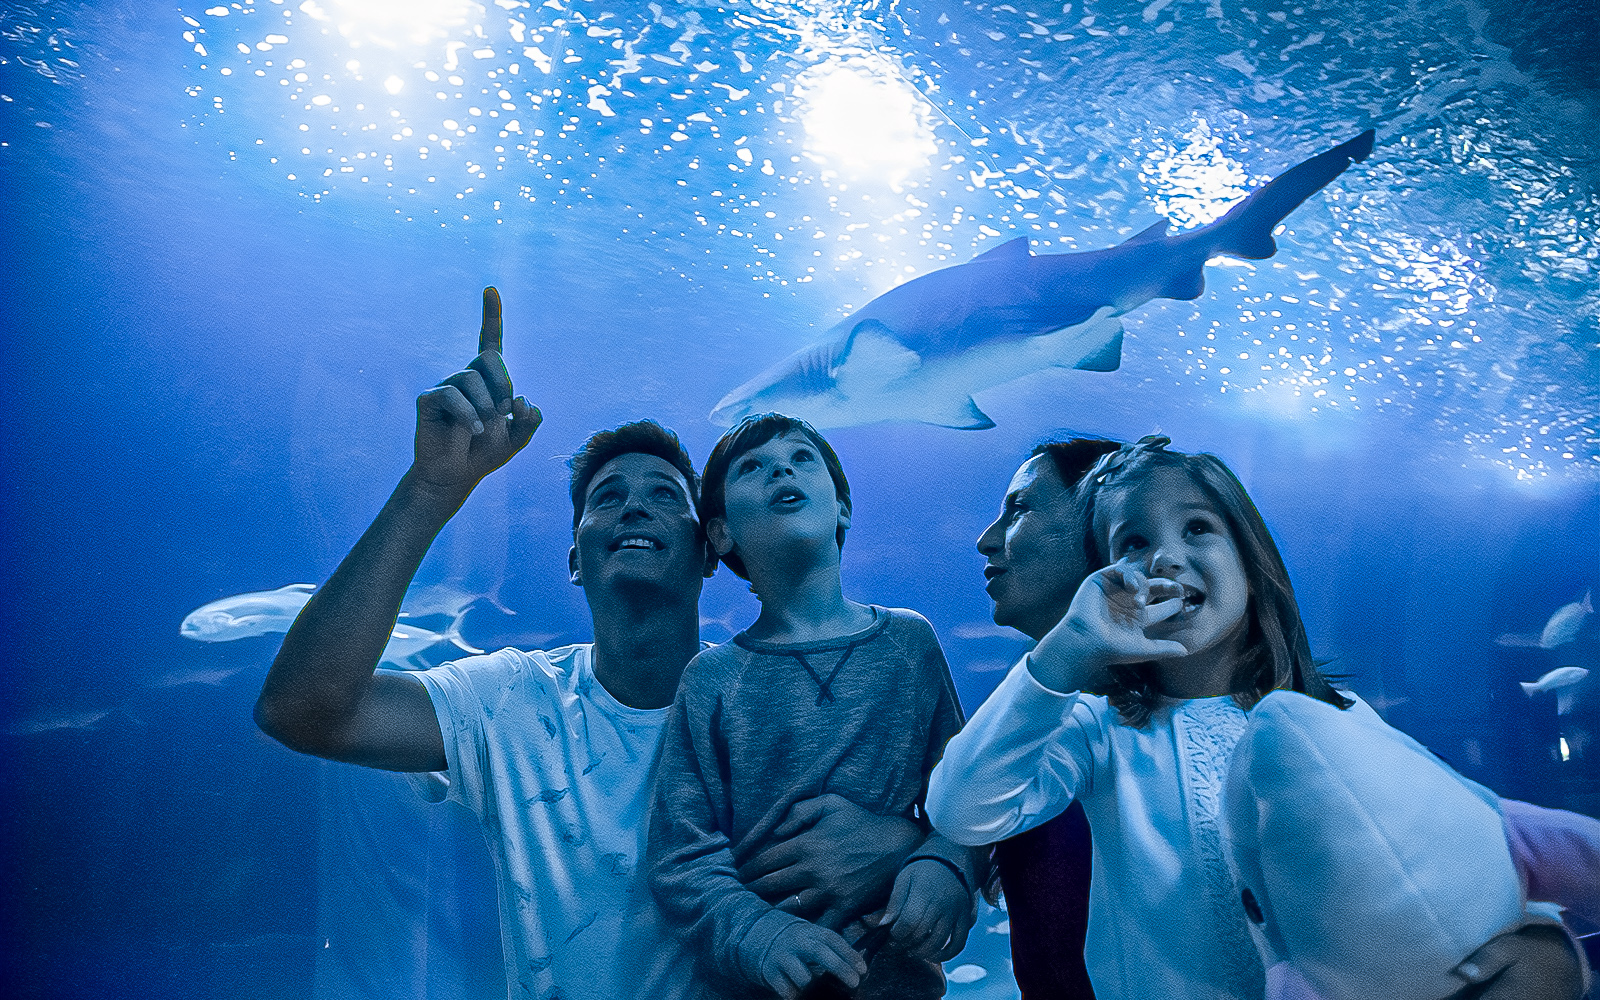 Image of 1-Day Tickets to Oceanogràfic with Optional 4D Cinema & Backstage Tour